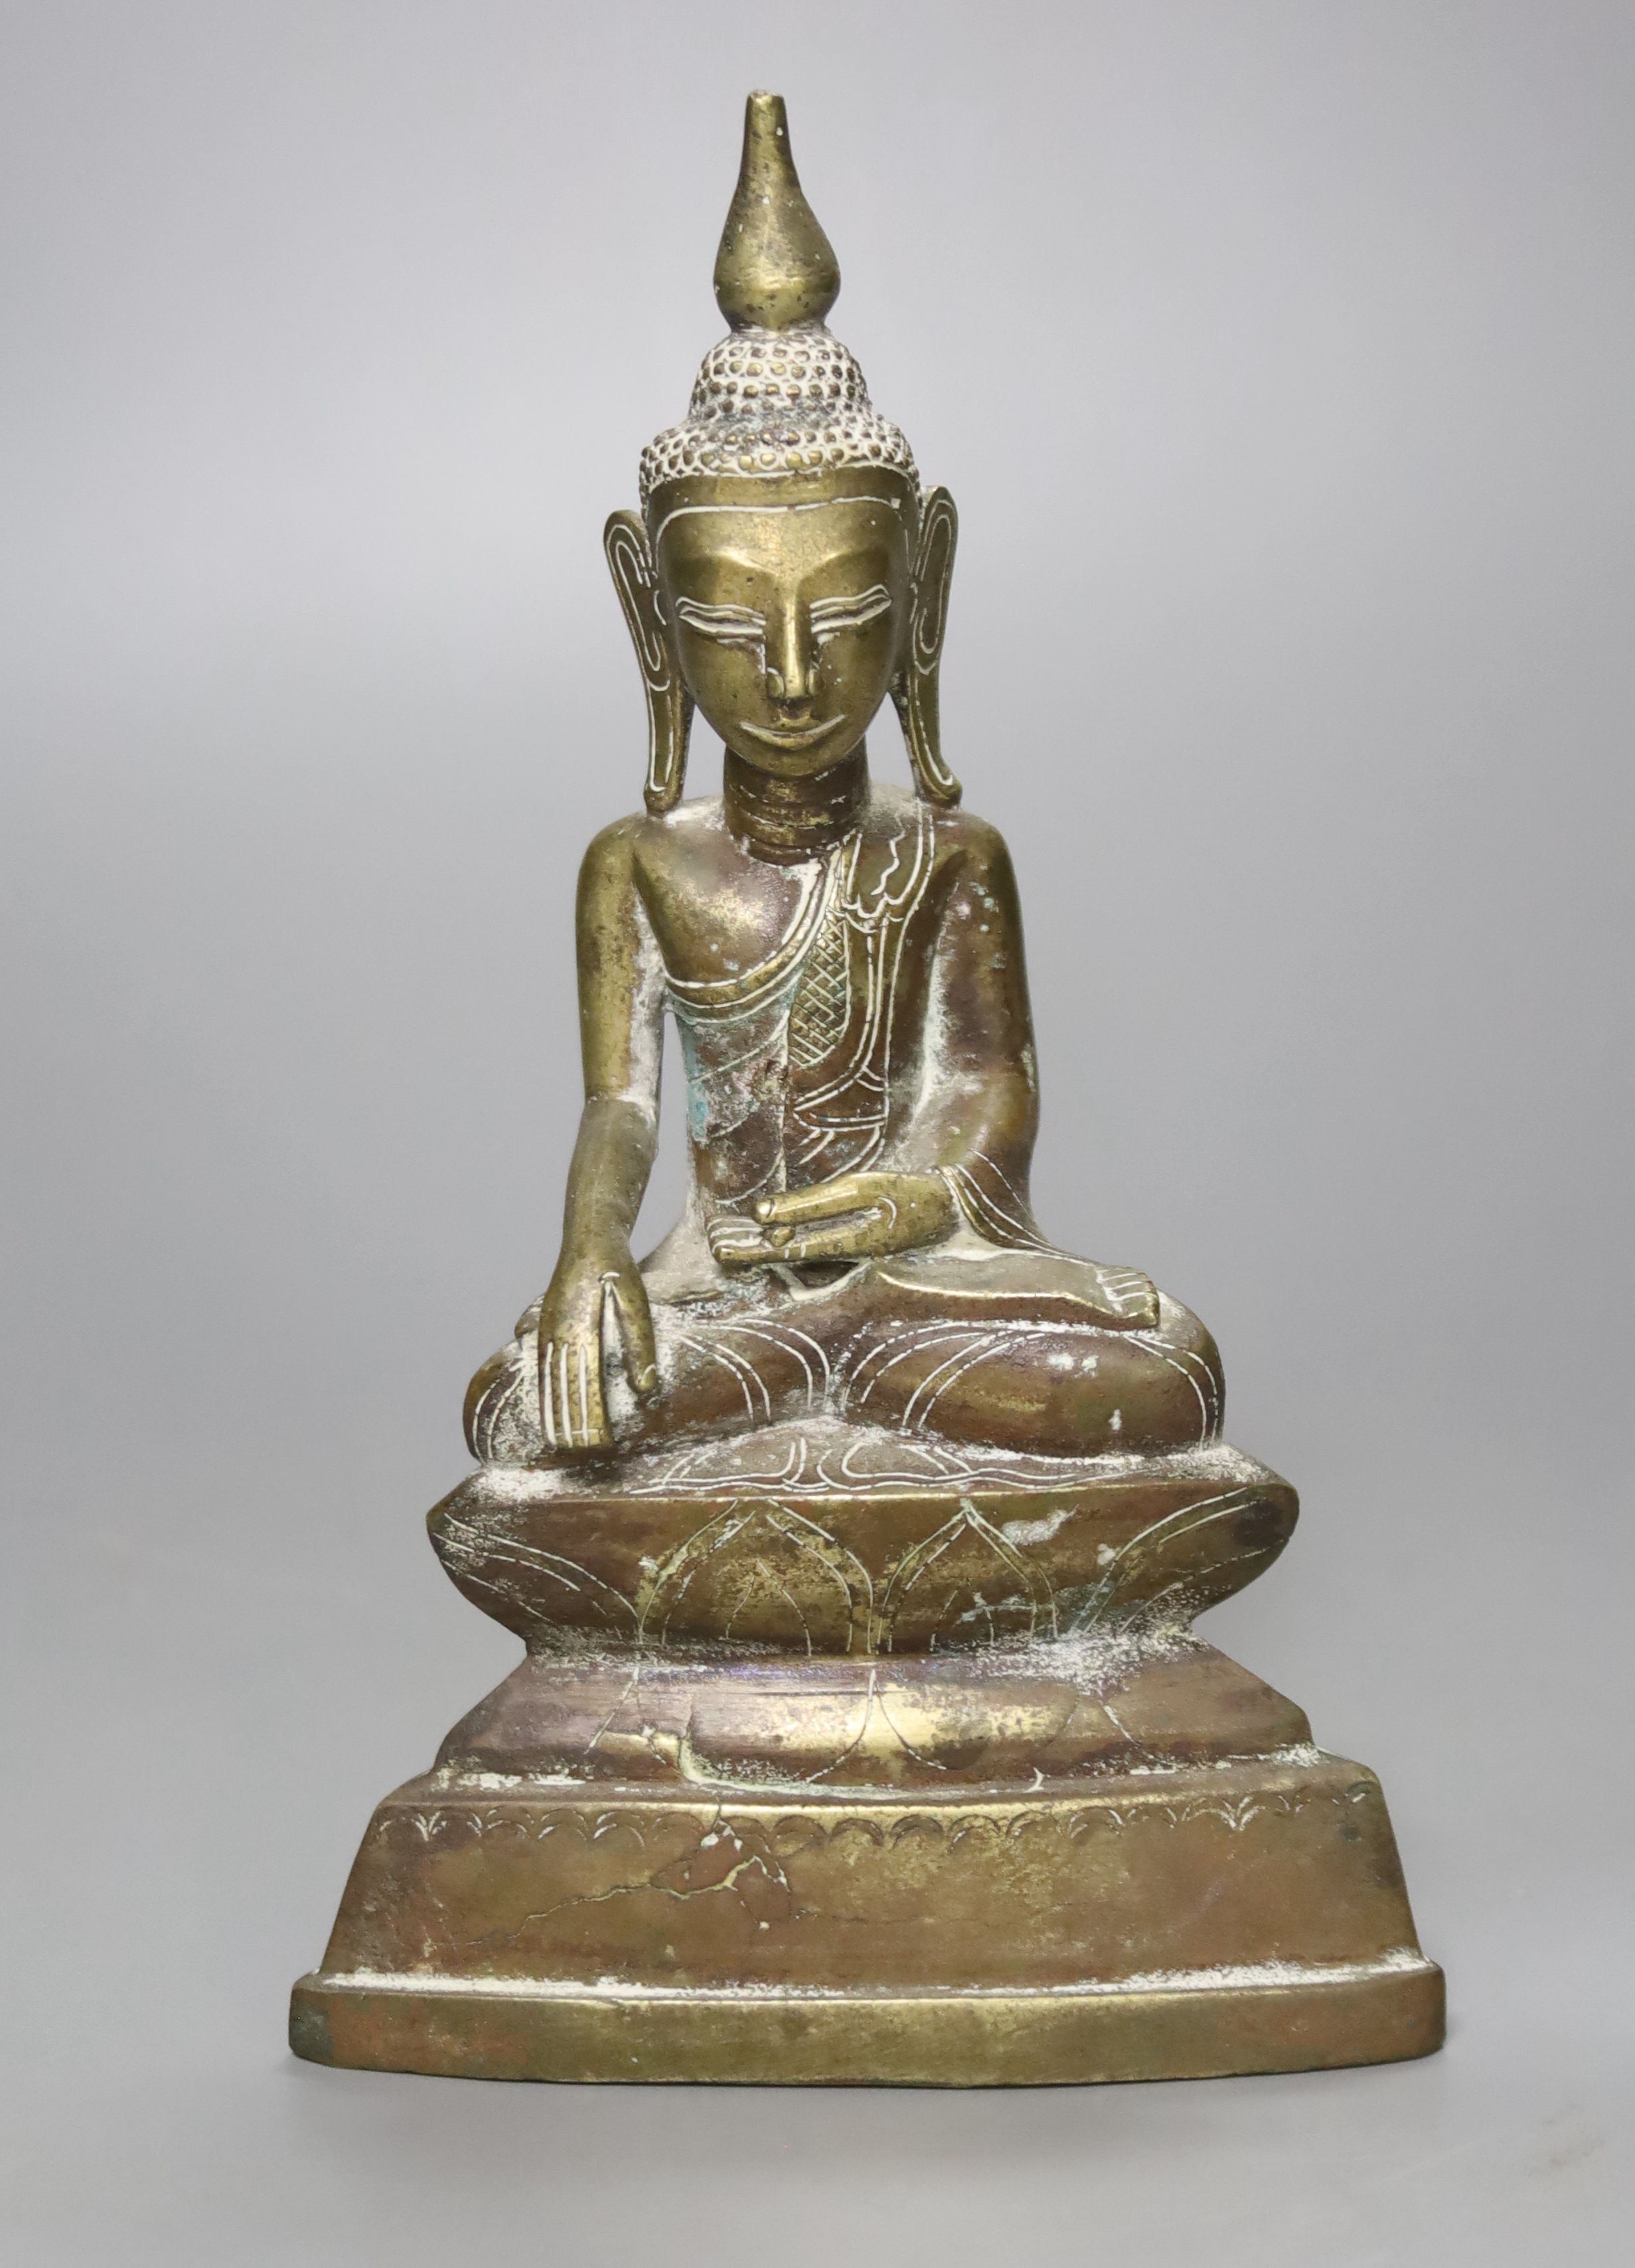 A small 19th century or later Tibetan lacquered cast brass figure of a seated Buddha, (filled), 18cm high